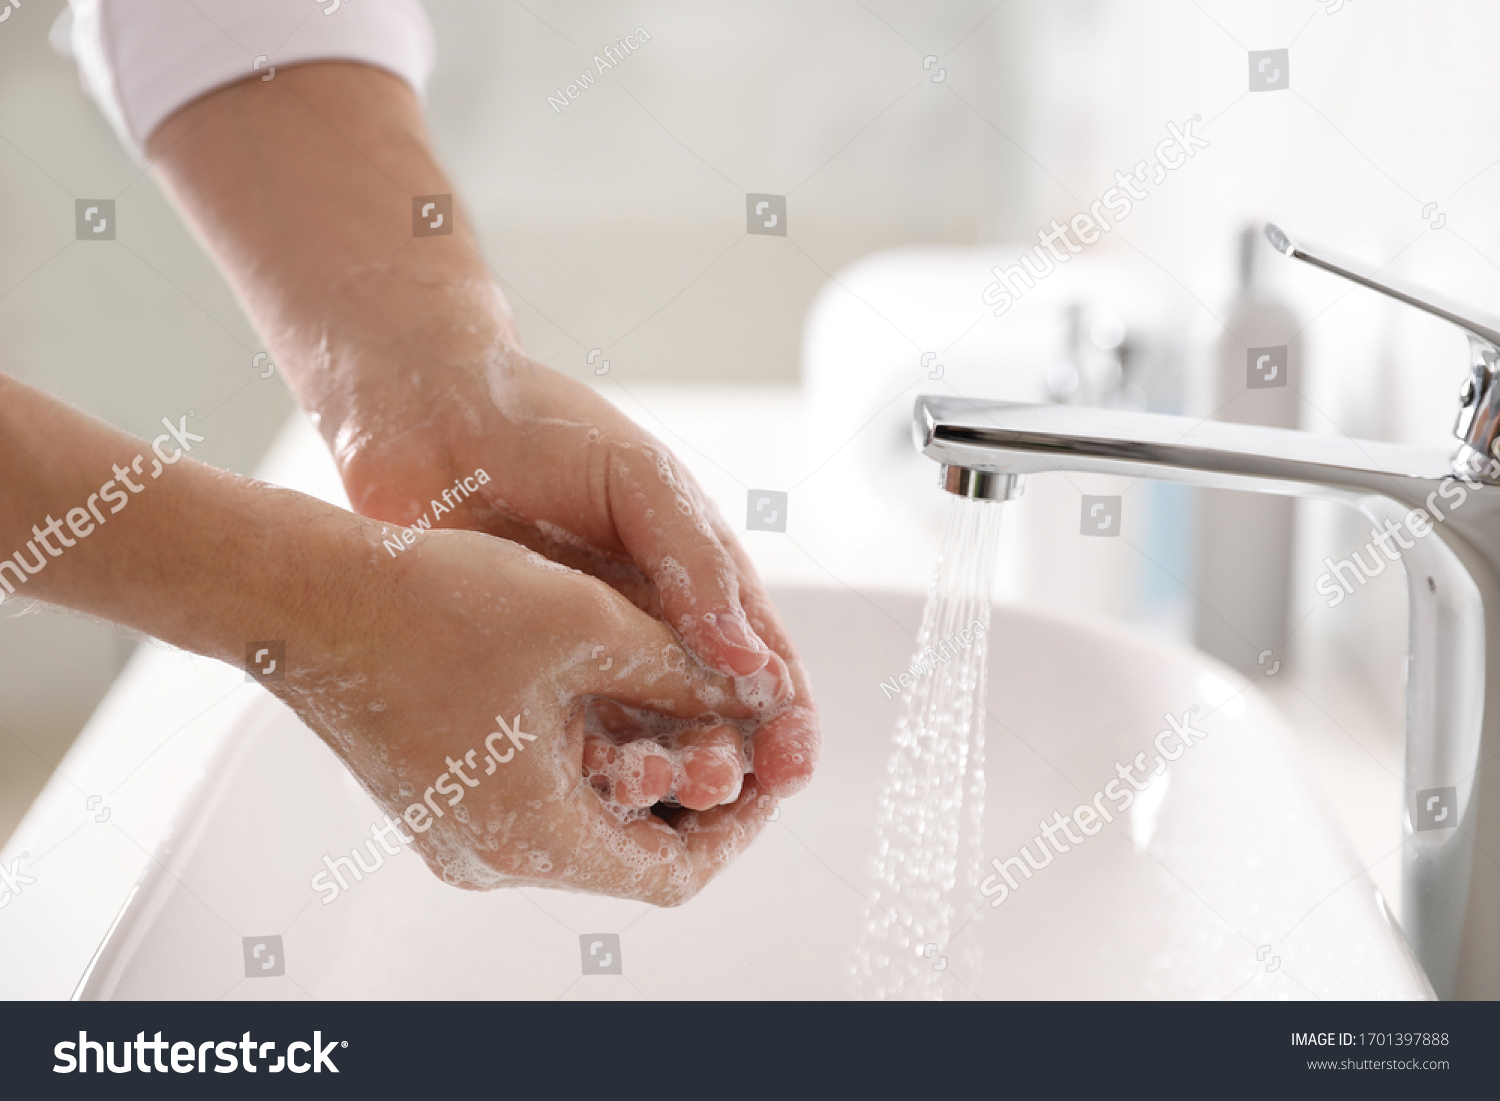 Man washing hands with soap over sink in bathroom, closeup #1701397888